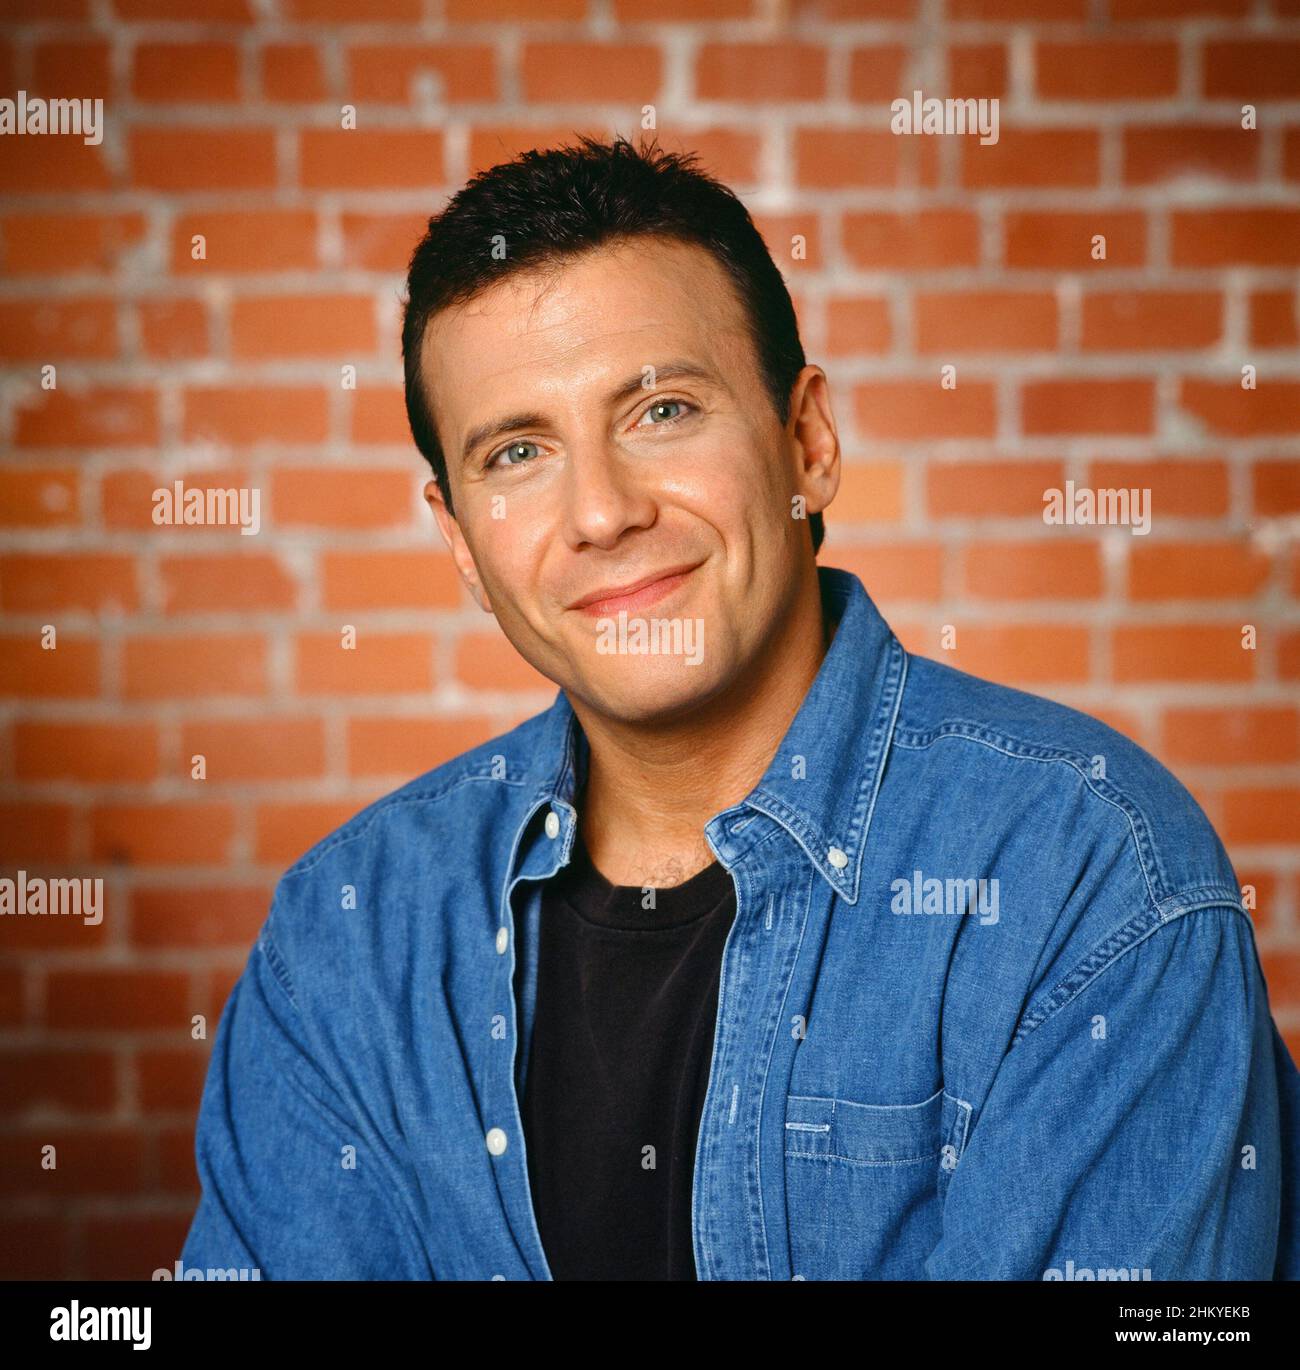 PAUL REISER in MAD ABOUT YOU (1992), directed by THOMAS SCHLAMME, MICHAEL LEMBECK, BARNET KELLMAN and DAVID STEINBERG. Credit: TRI STAR TELEVISION / Album Stock Photo